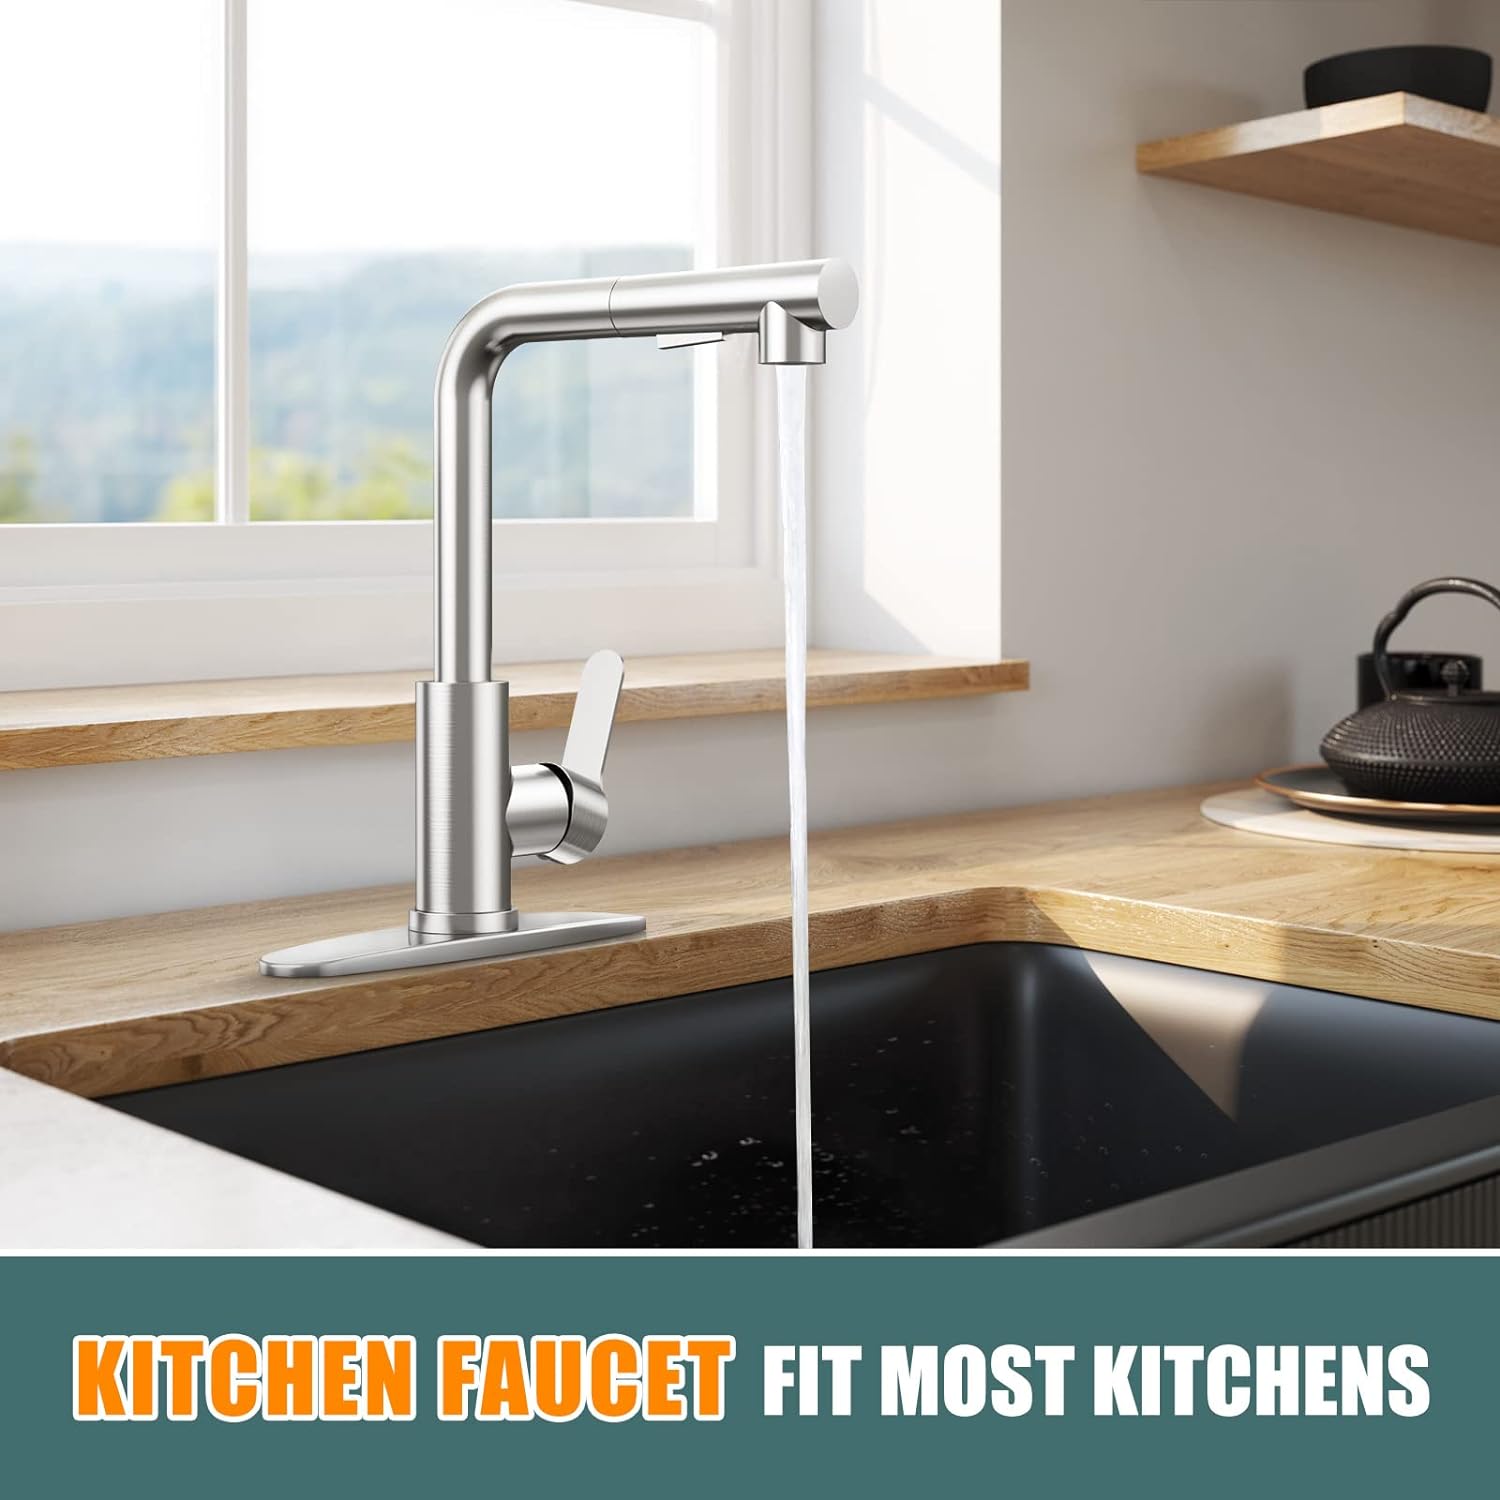 HURRAN Kitchen Faucet with Pull Down Sprayer, Brushed Nickel Single Handle Kitchen Sink Faucet with Deck Plate to Cover 1 or 3